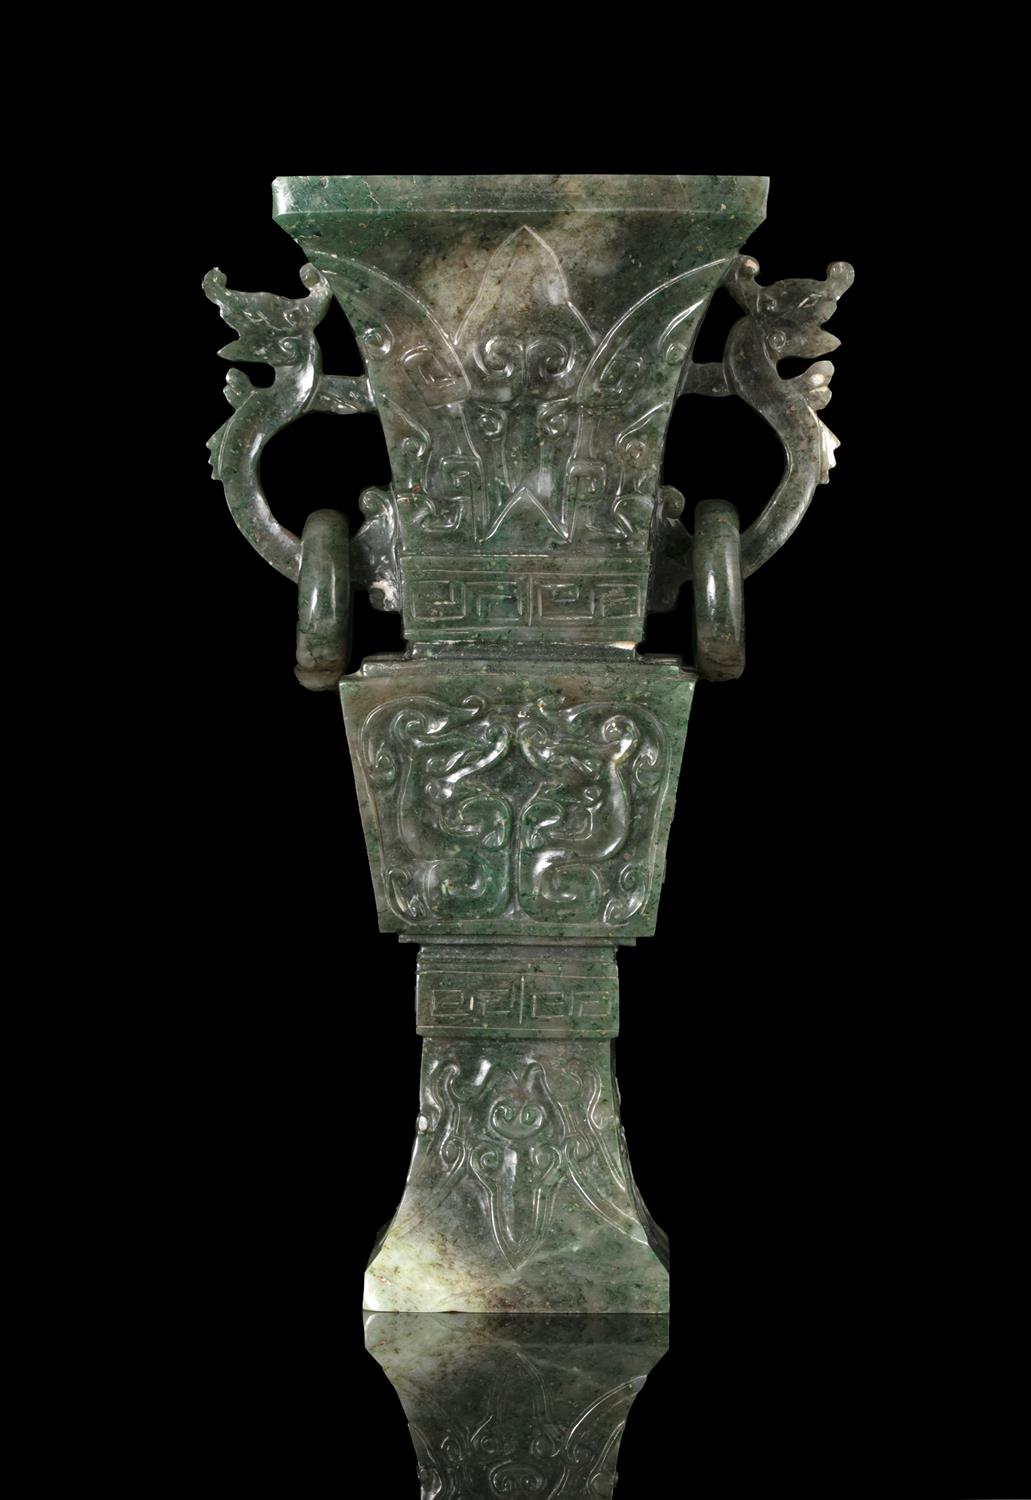 A JADE ARCHAISTIC VESSEL, GU China, 20th century Of archaistic gu shape, with two dragon handles - Image 9 of 10